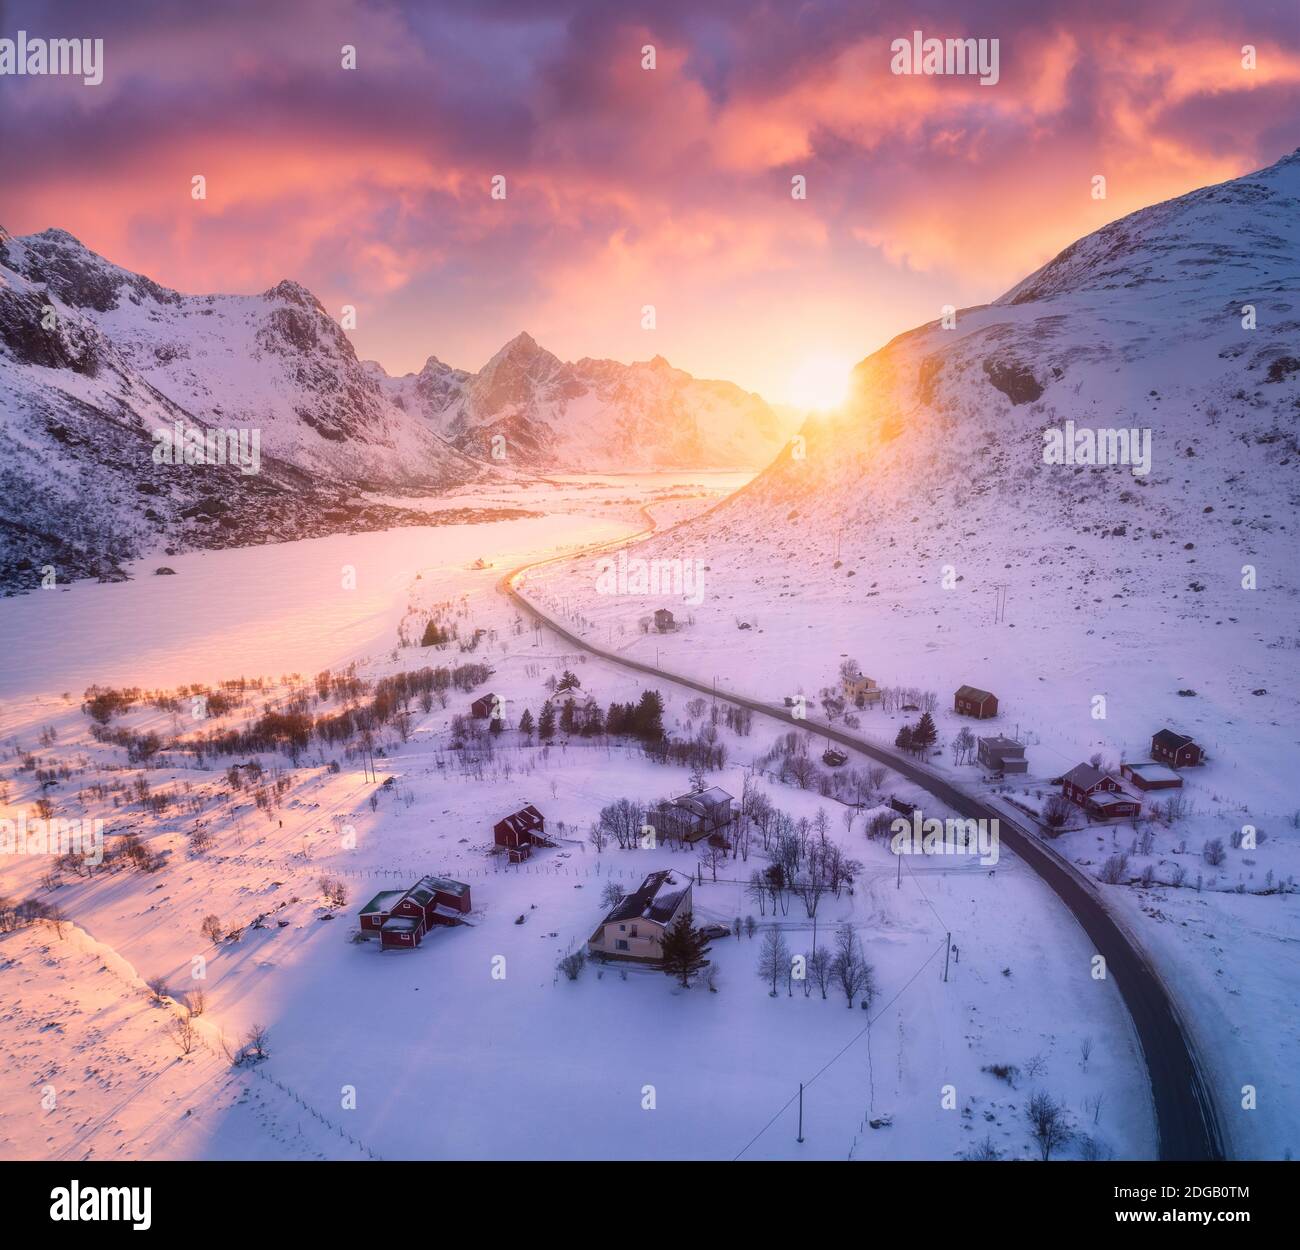 Beautiful road in snowy mountains in winter at sunset Stock Photo